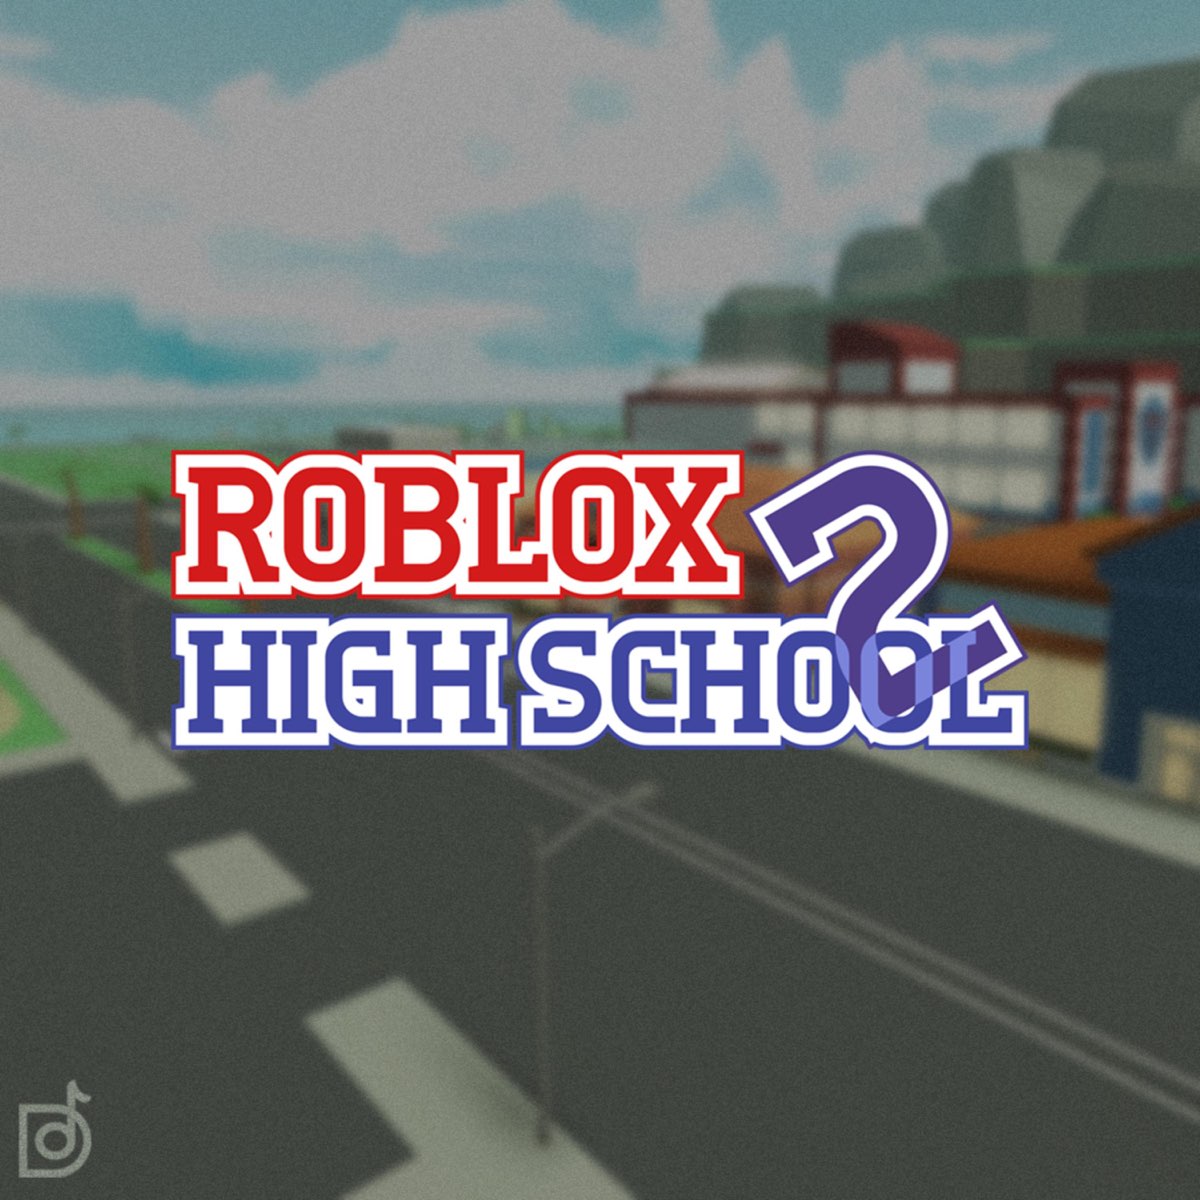 Roblox High School 2 Original Game Soundtrack By Directormusic On Apple Music - roblox high school 2 madis hideout